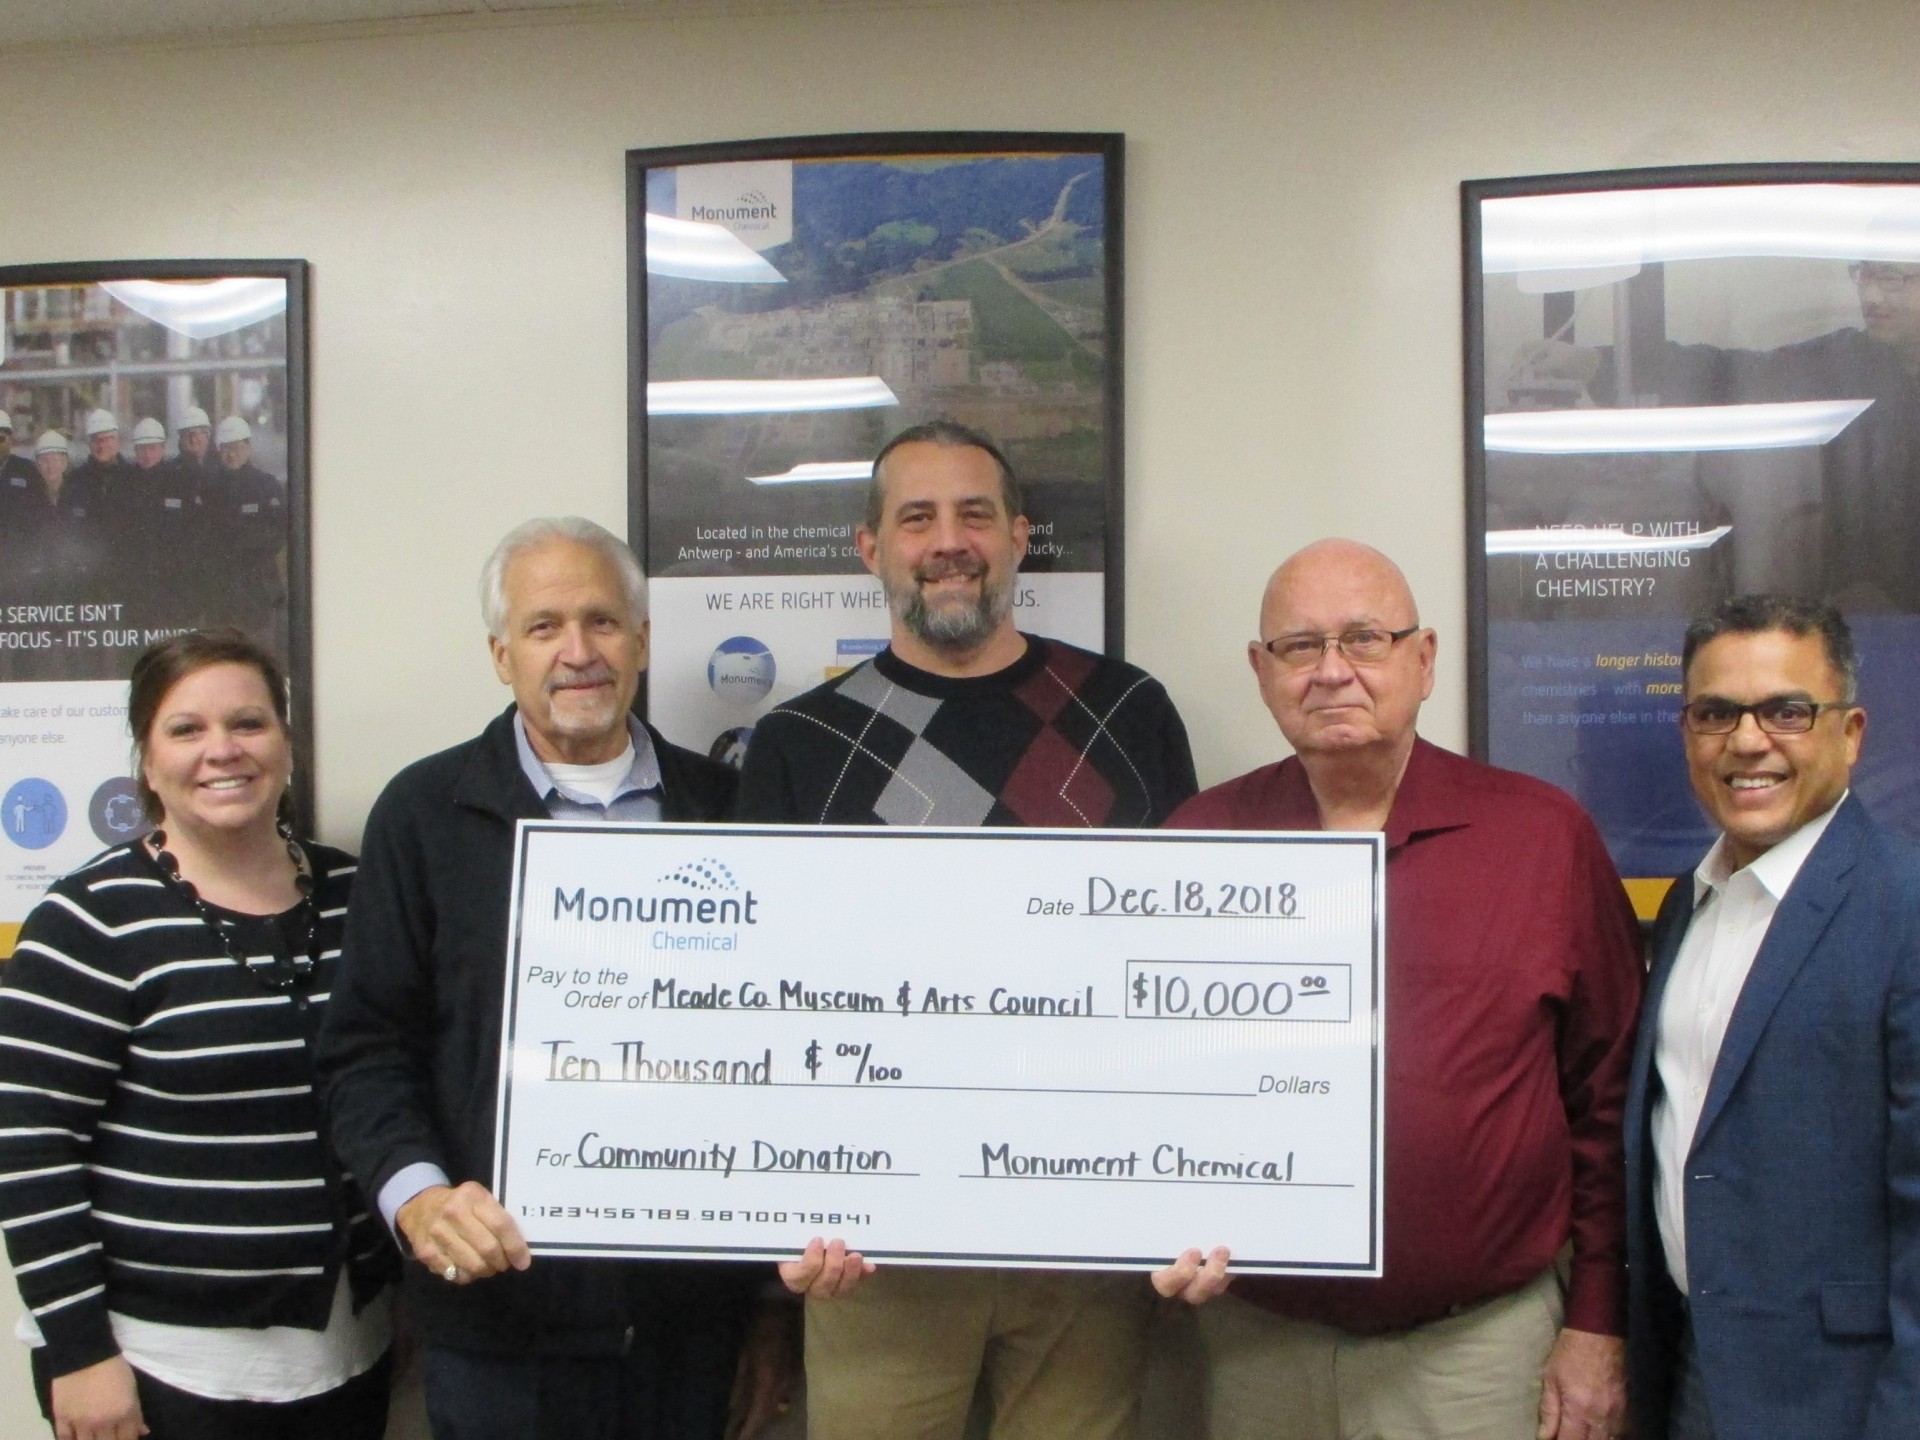 New Monument Annual Grant Supports the Building of a Riverfront Amphitheater in Brandenburg, KY